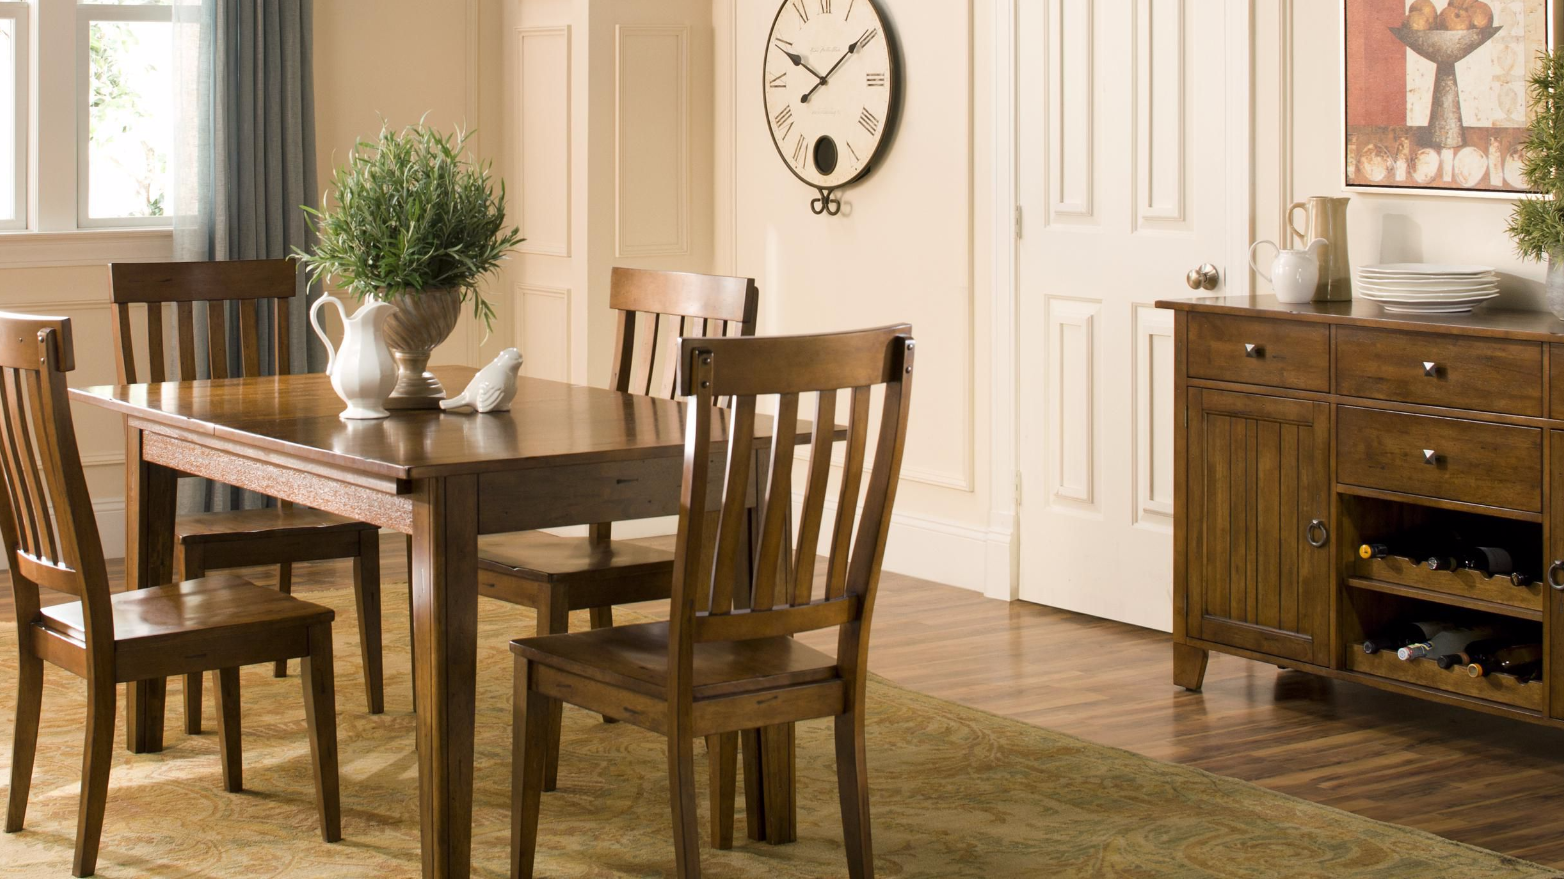 All Wood Dining Room Table Clearance, 52% OFF | www.bculinarylab.com